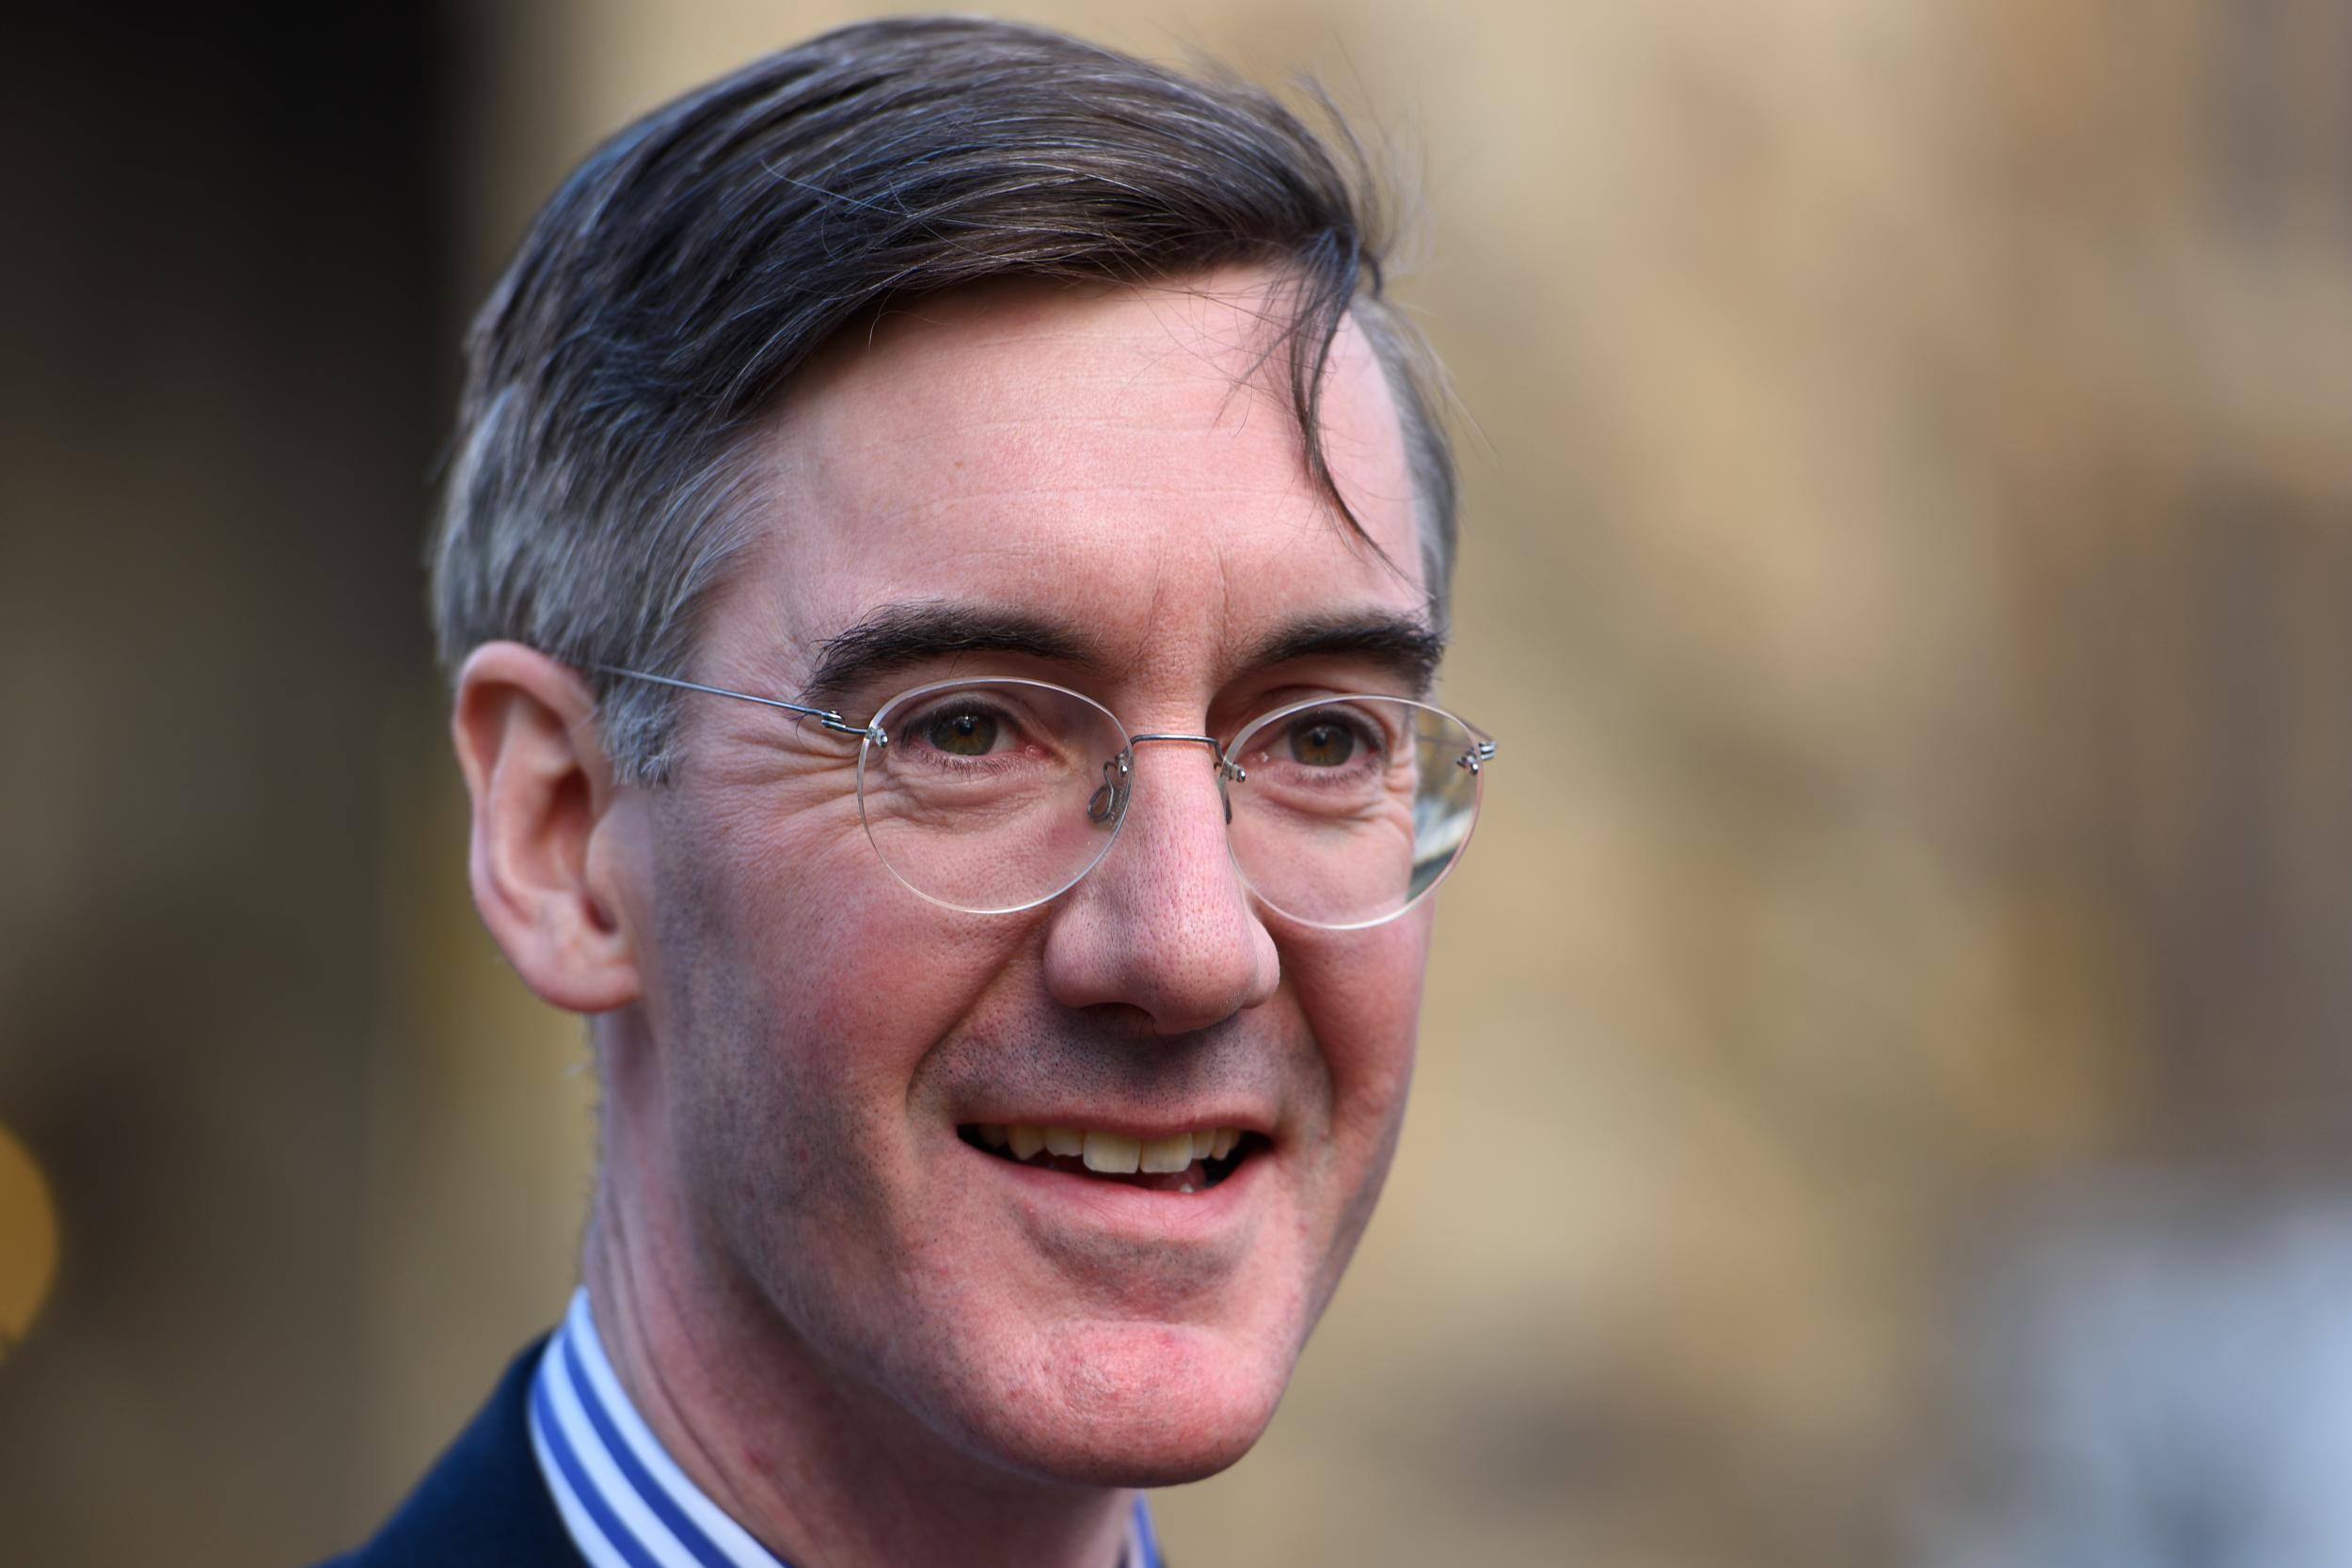 Jacob Rees-Mogg wants the Prime Minister to fill the upper house with more Brexiteers